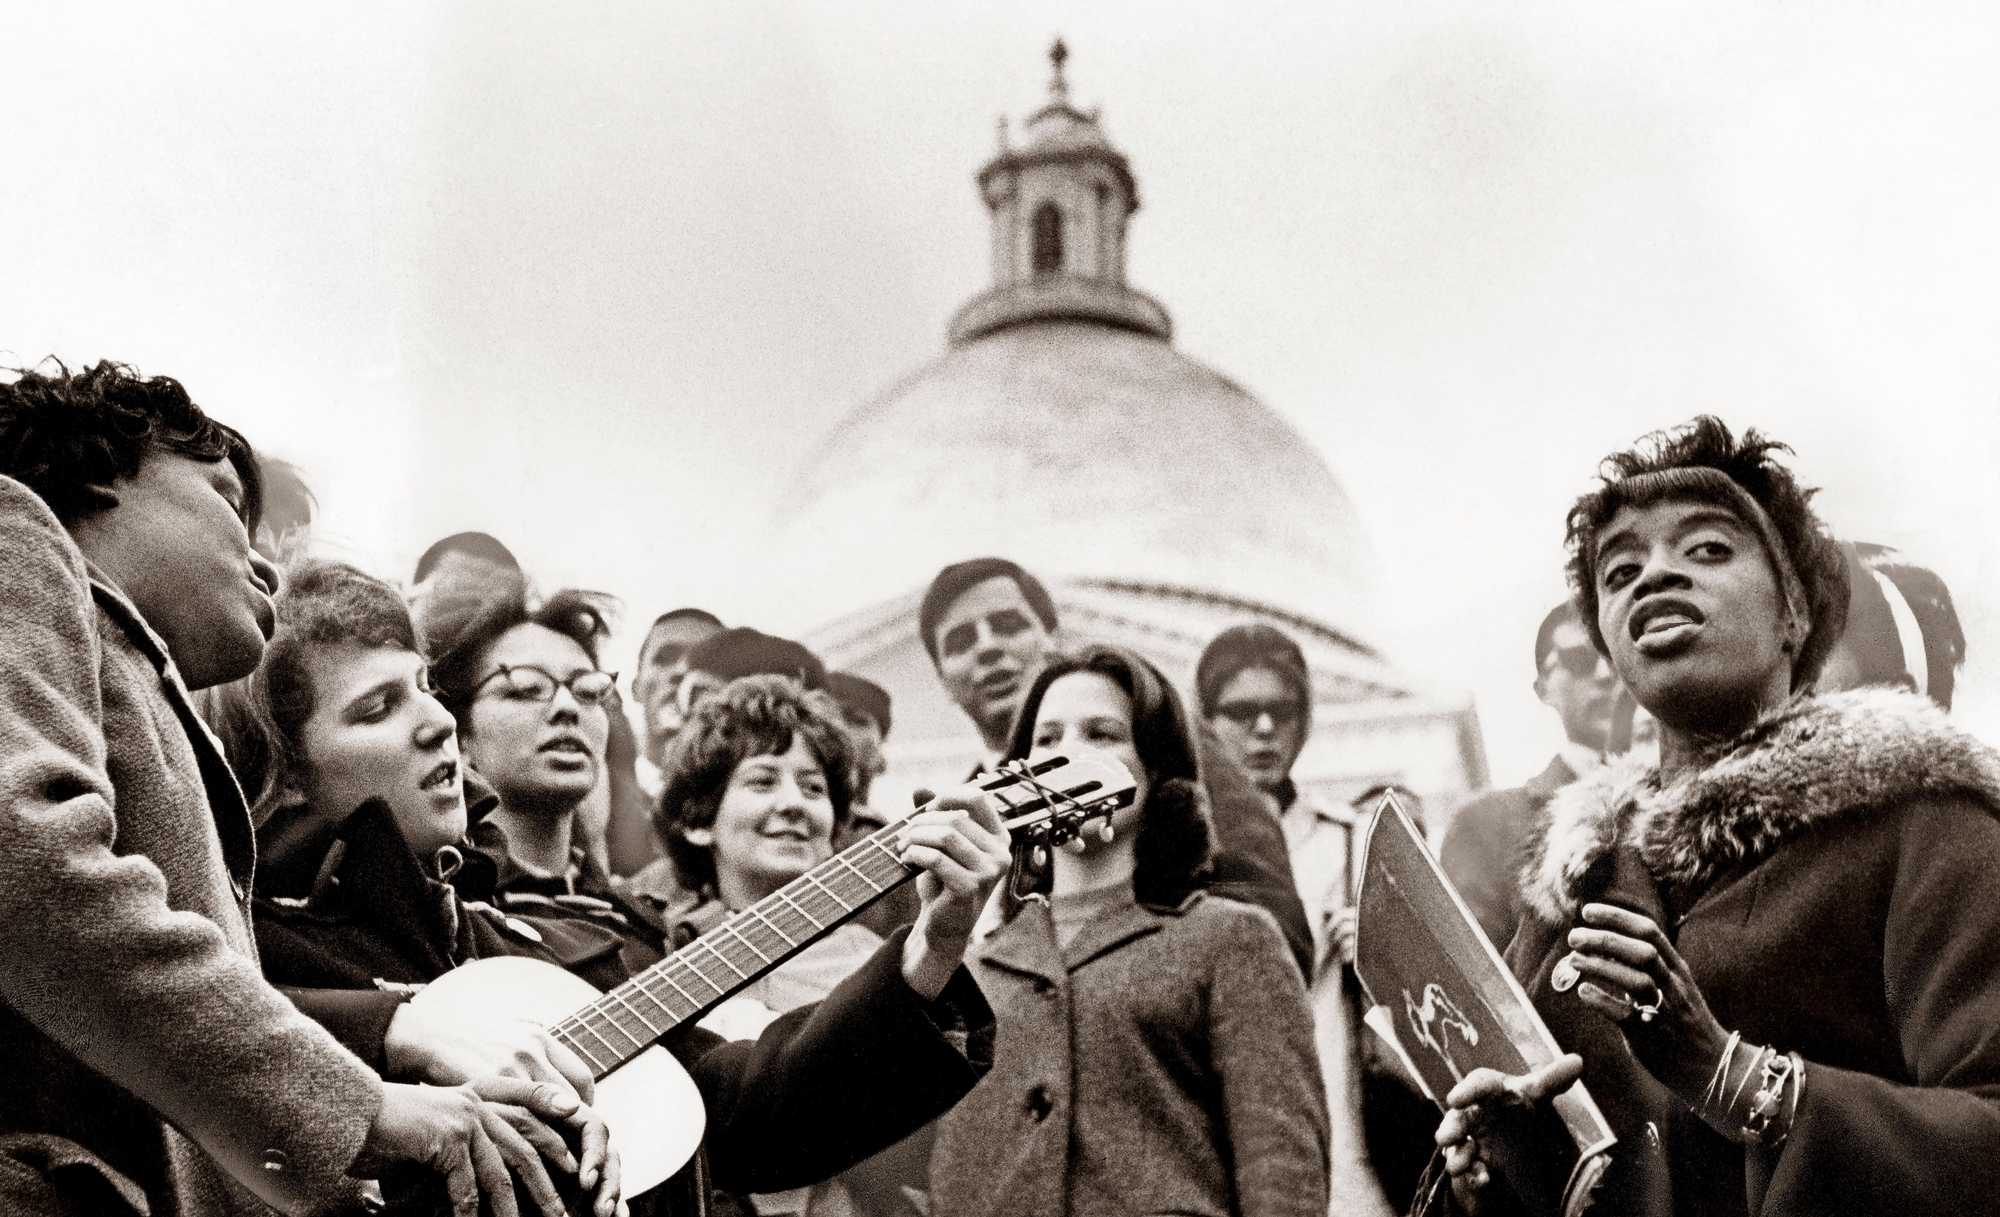 Students sang songs on the Boston Common during a Freedom School event, with the State House in the background on Feb 26, 1964. (Paul Connell/Globe Staff) 